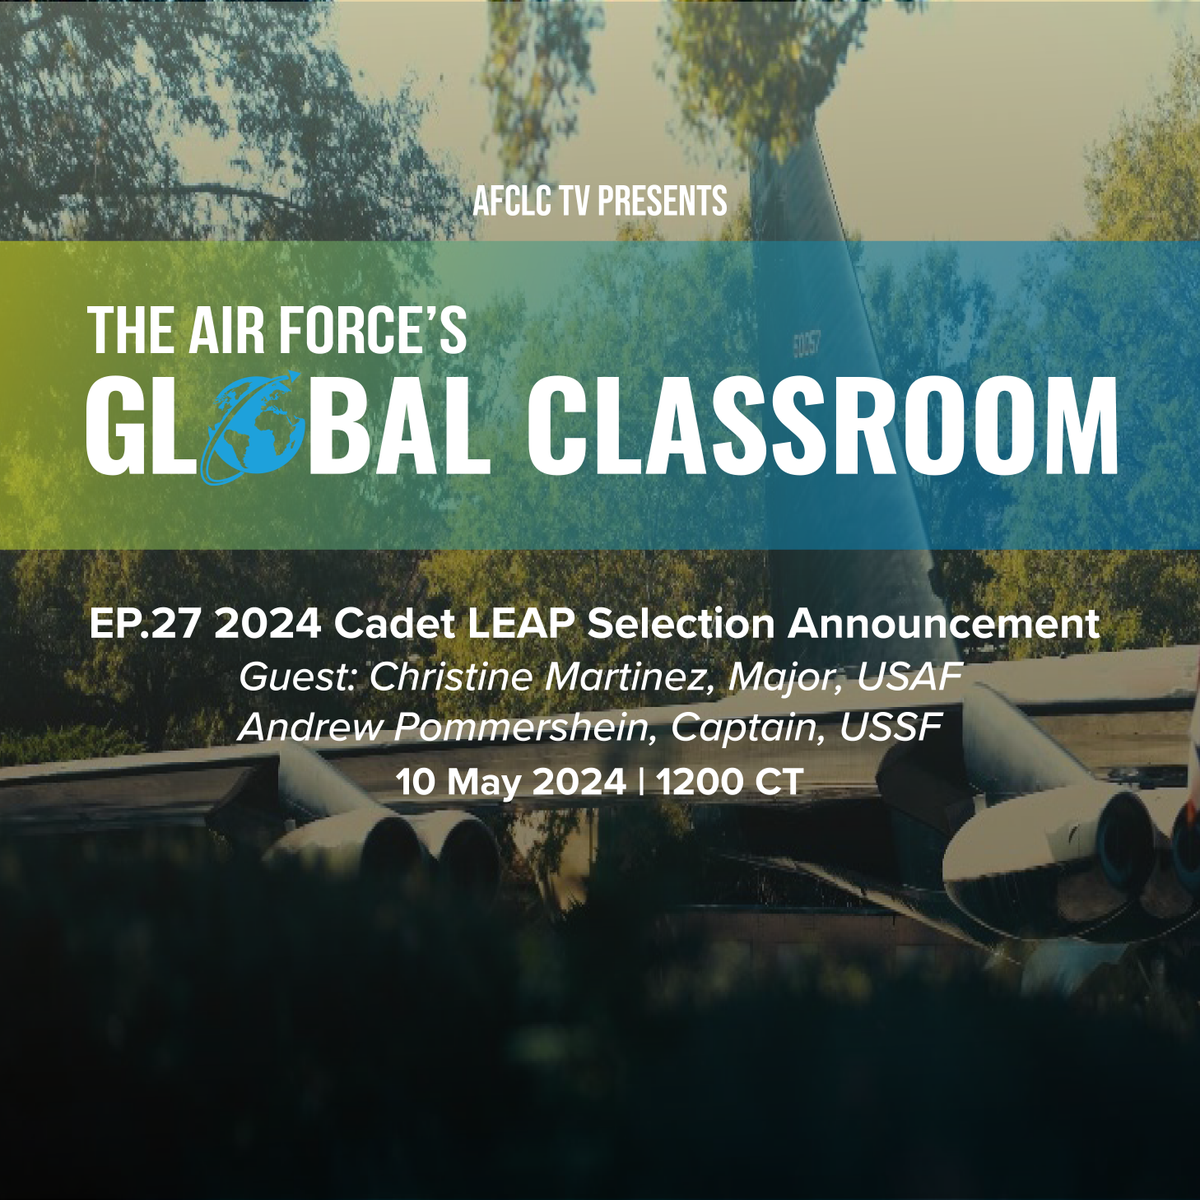 #HappeningToday ​🥳 Congrats @AFCLC's 2024 Cadet LEAP Selects! We very proud of the 104 new #LEAPScholars joining the team! Watch the announcement here facebook.com/AirForceCultur… #AFCLCGlobalClassroom @HQAirUniversity @AETCommand @usairforce @SpaceForceDOD @AF_Academy @USAFROTC